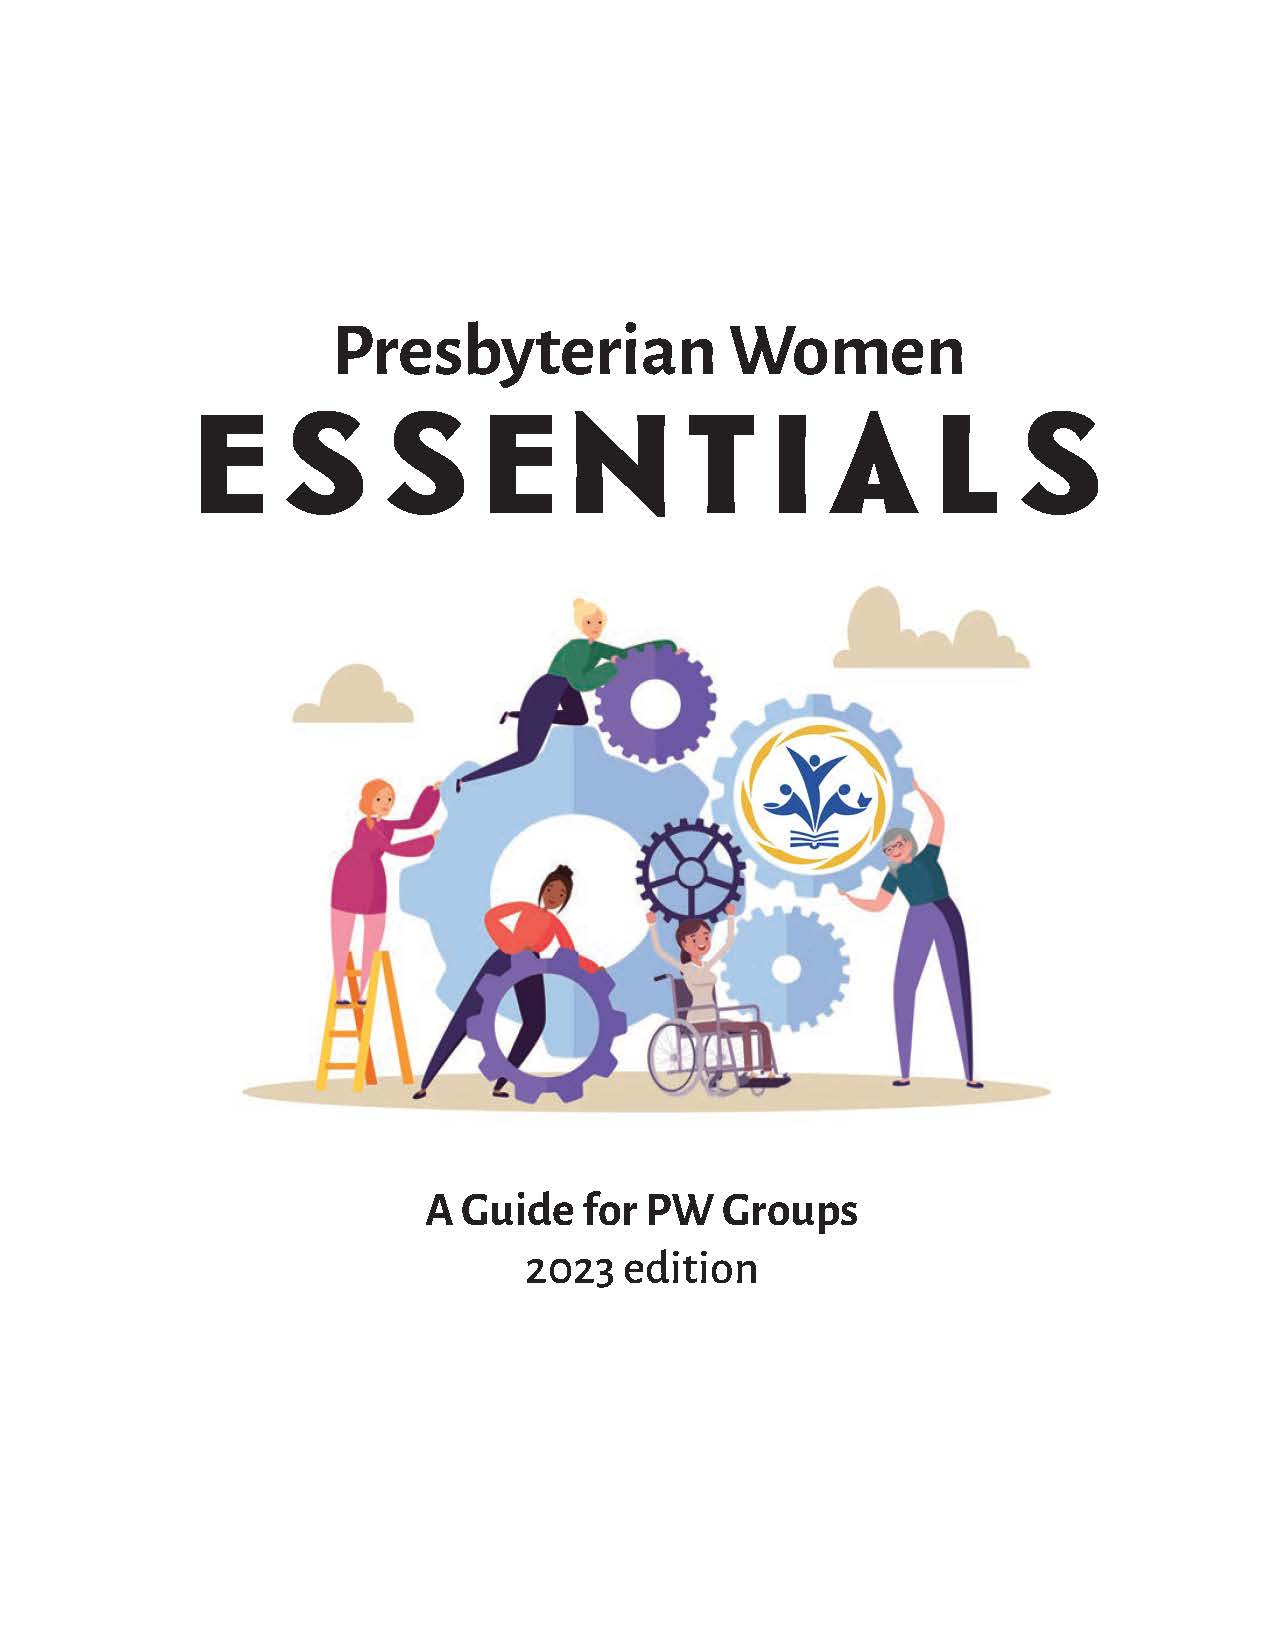 Presbyterian Women Essentials: A Guide for PW Groups (2023 edition - download only)